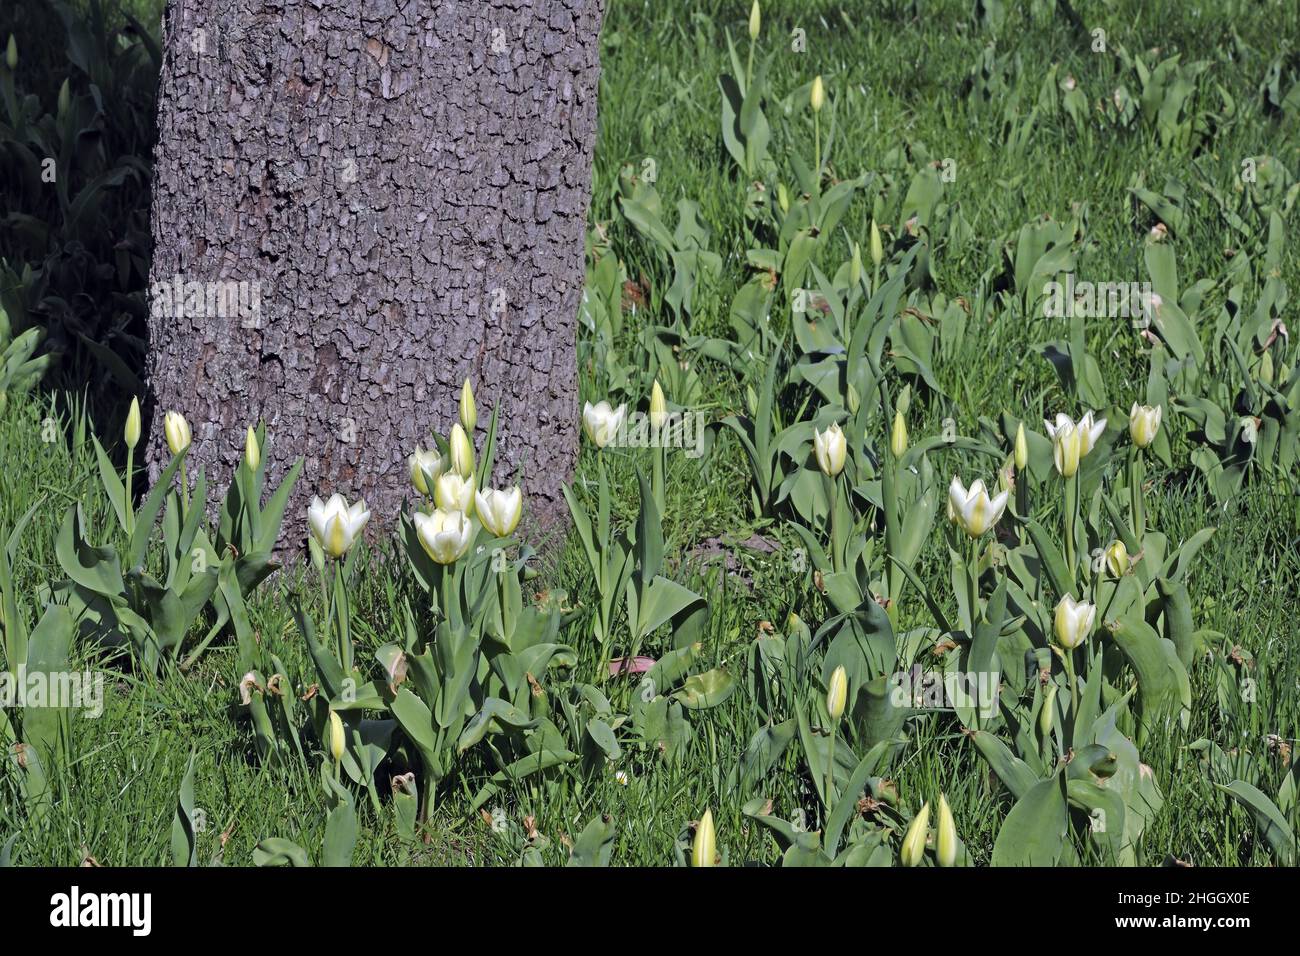 common garden tulip (Tulipa spec.), white tulips in a meadow next to a tree trunk, Germany Stock Photo